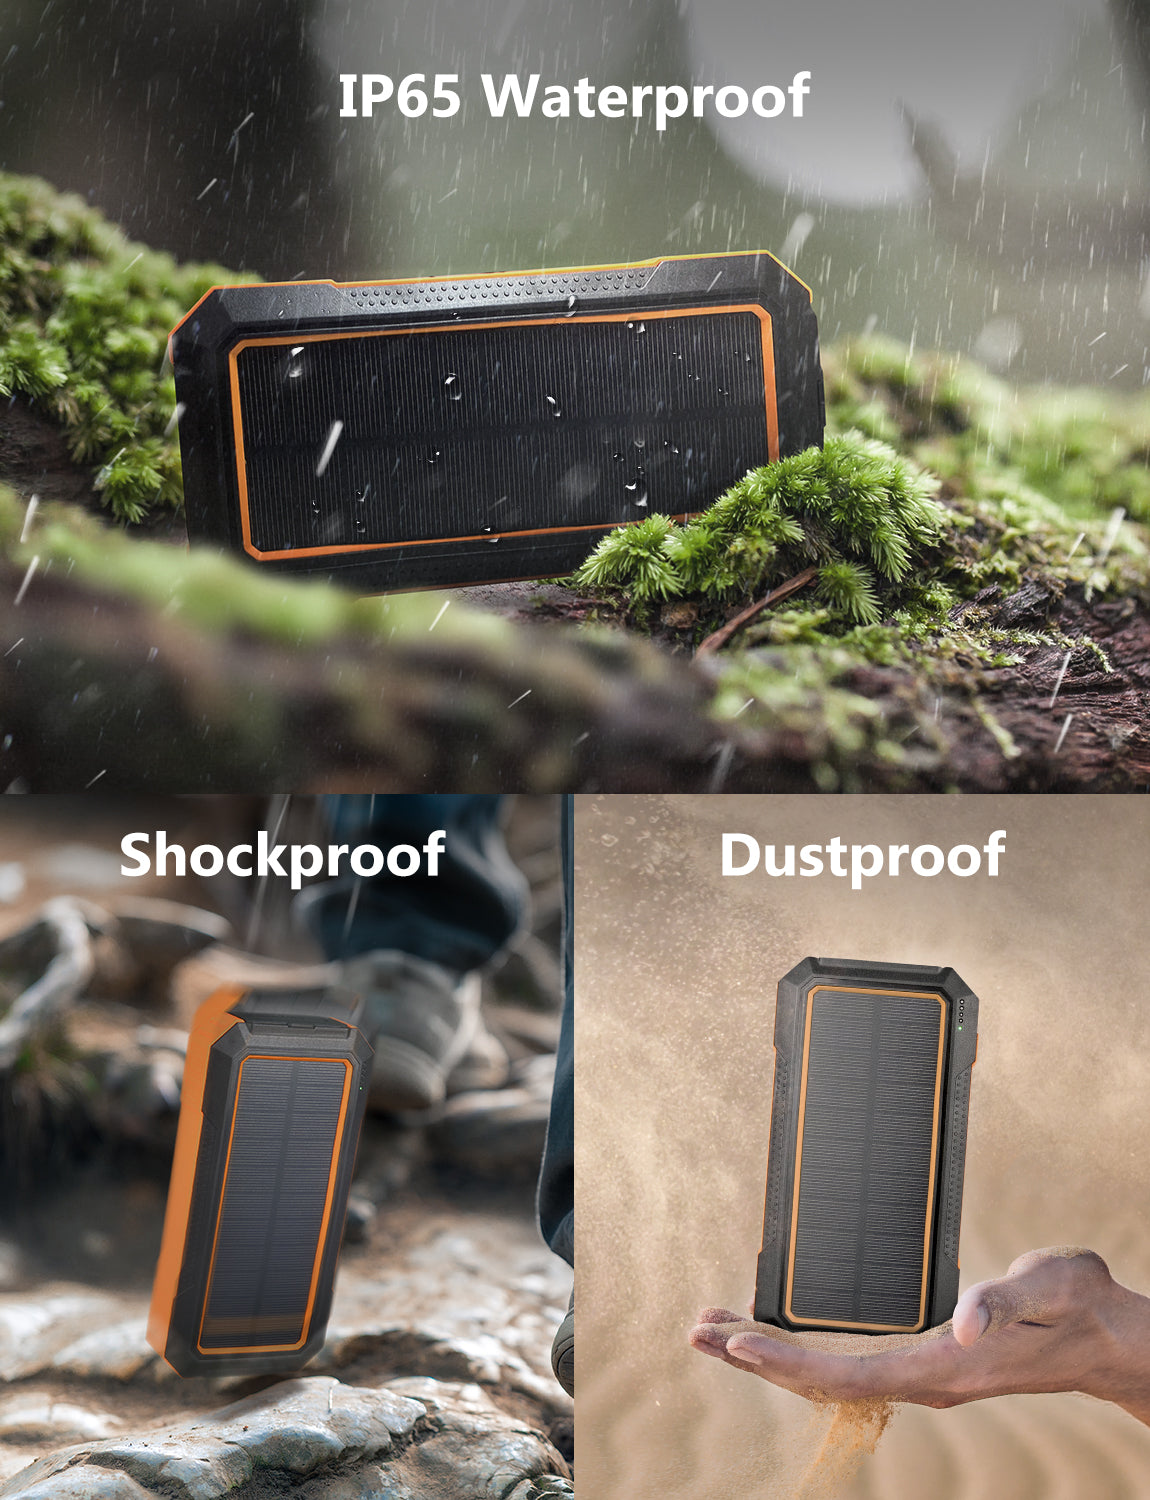 The power bank has an IP65 waterproof rating and is shockproof and dustproof. 